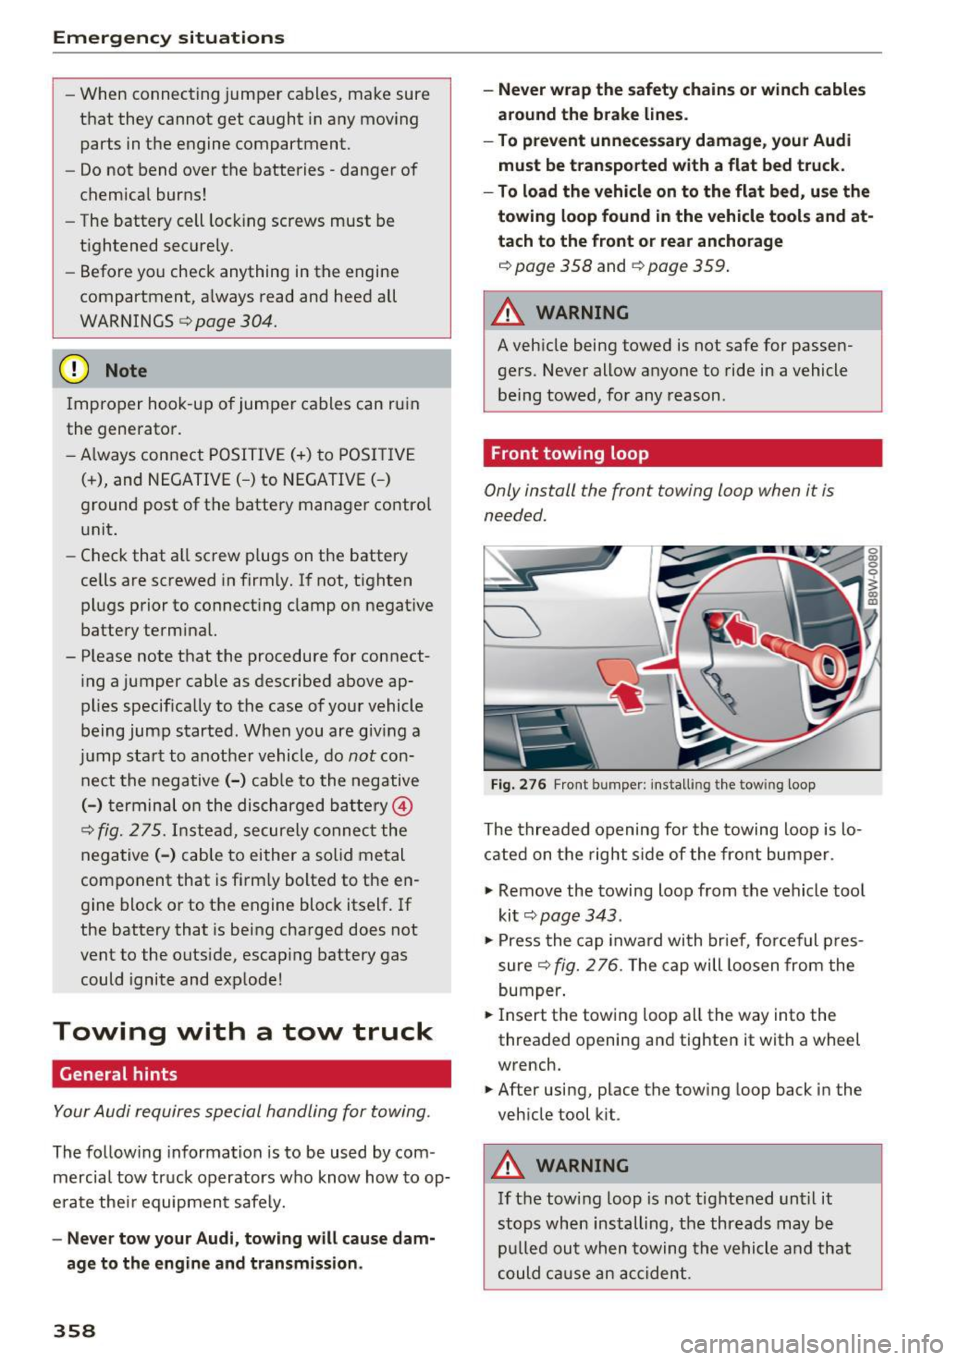 AUDI A4 2017  Owners Manual Emergency situations 
-When  connecting  jumper  cables,  make  sure 
that  they  cannot  get  caught  in any  moving 
parts  in the  engine  compartment. 
- Do not  bend  over  the  batteries -danger